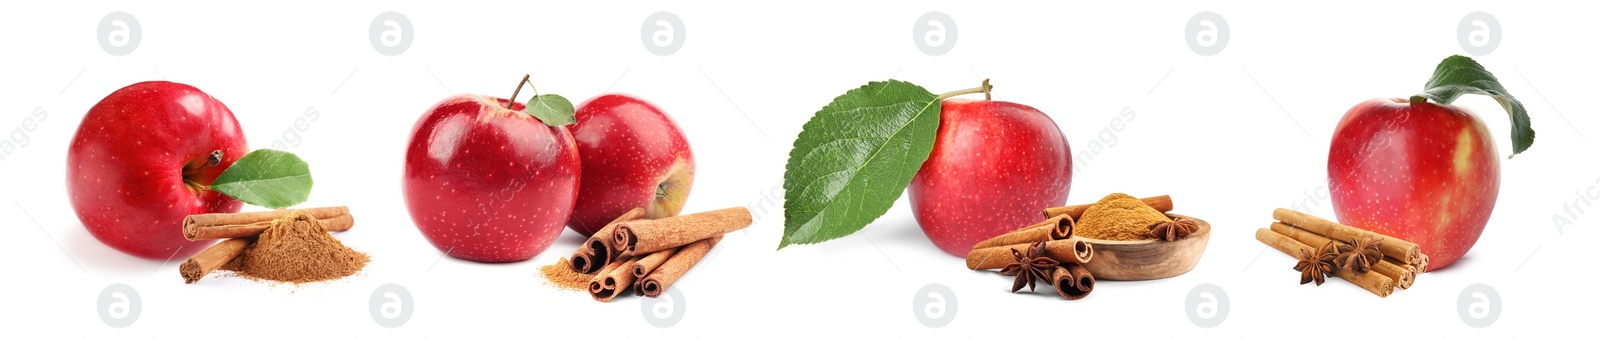 Image of Aromatic cinnamon sticks, powder and red apples isolated on white, set